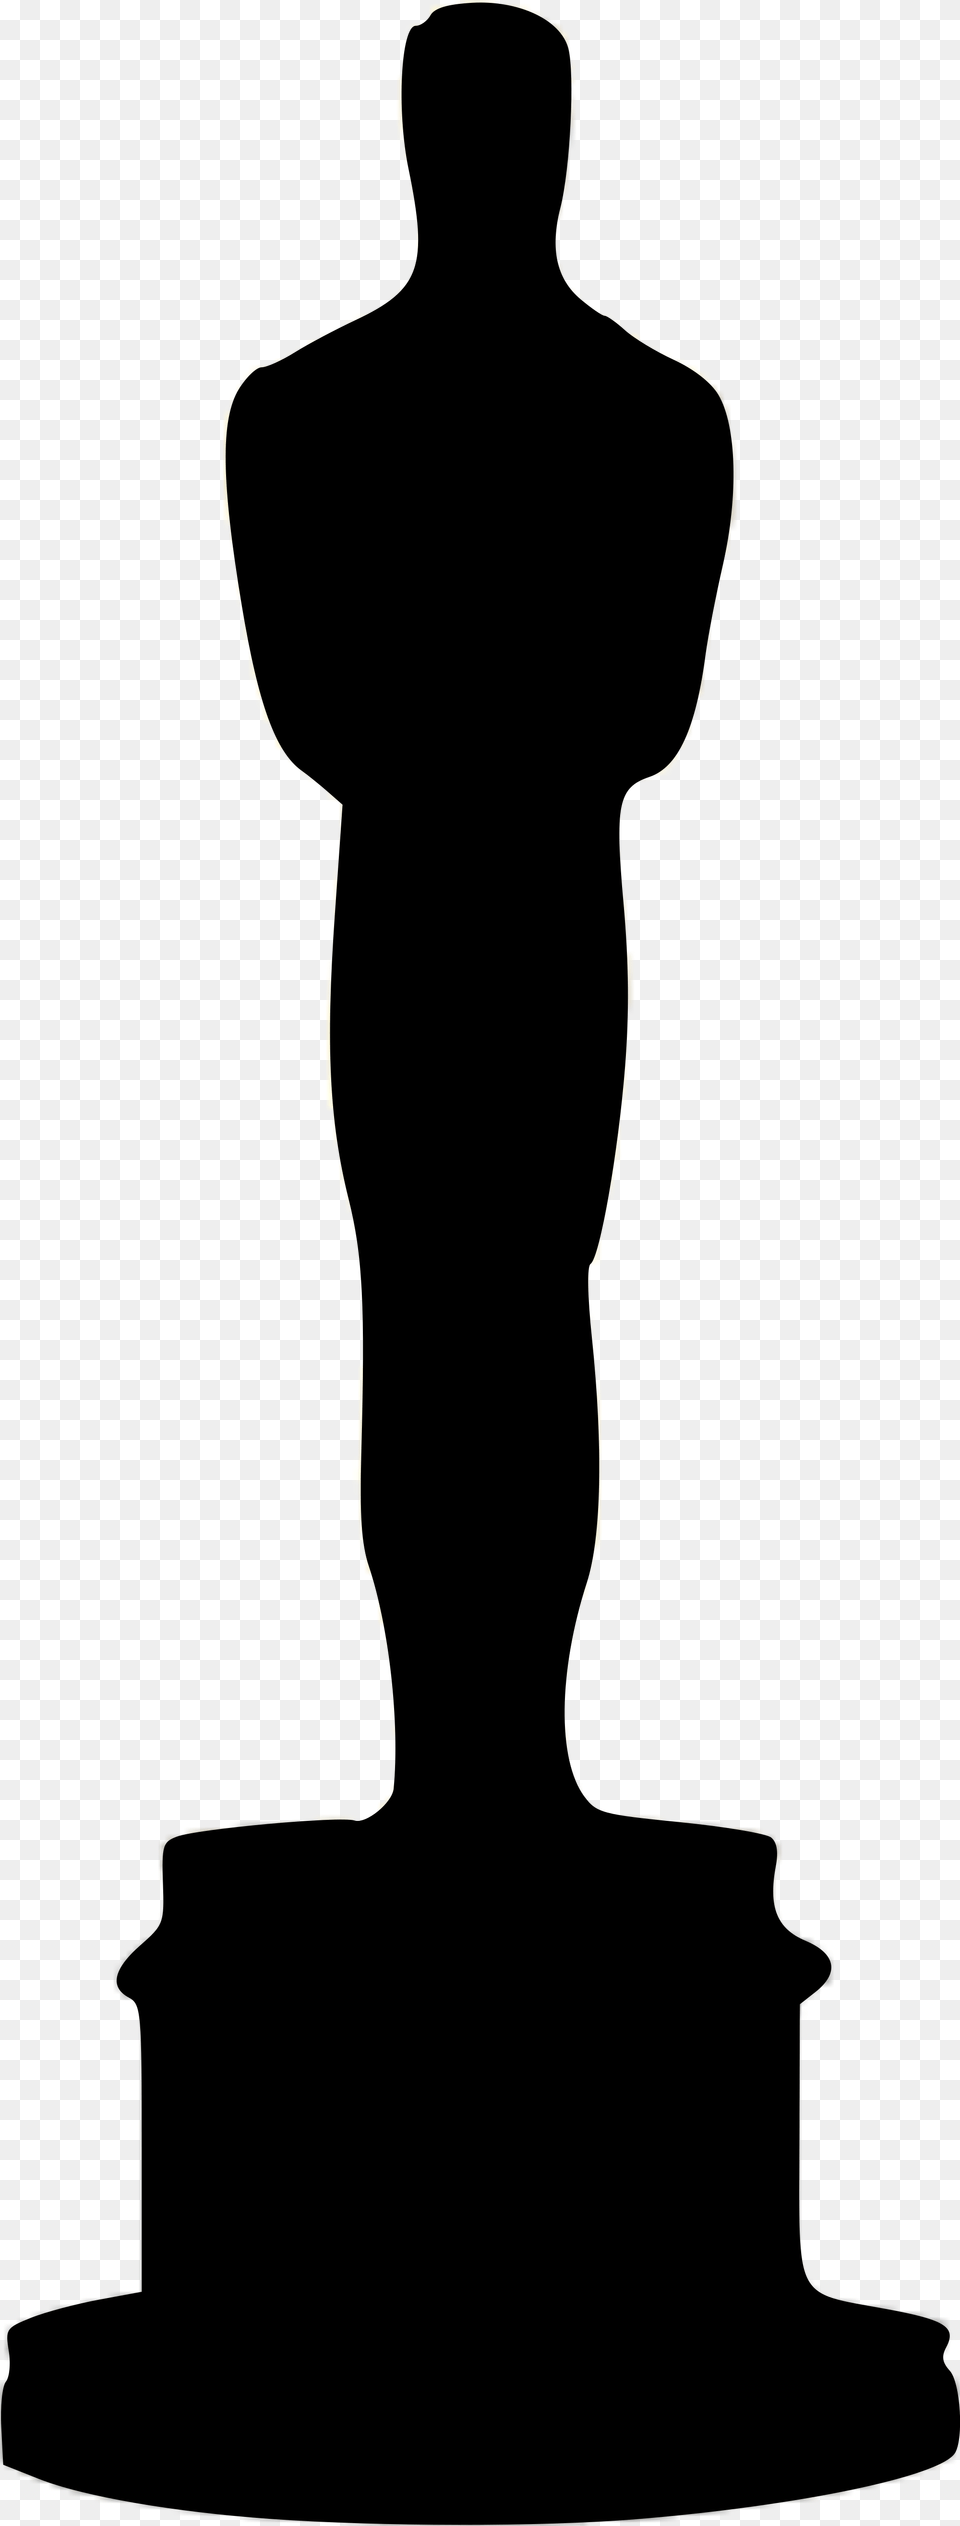 Image Result For Oscar Statue Clipart Sel Anniversary, Silhouette, Adult, Male, Man Png